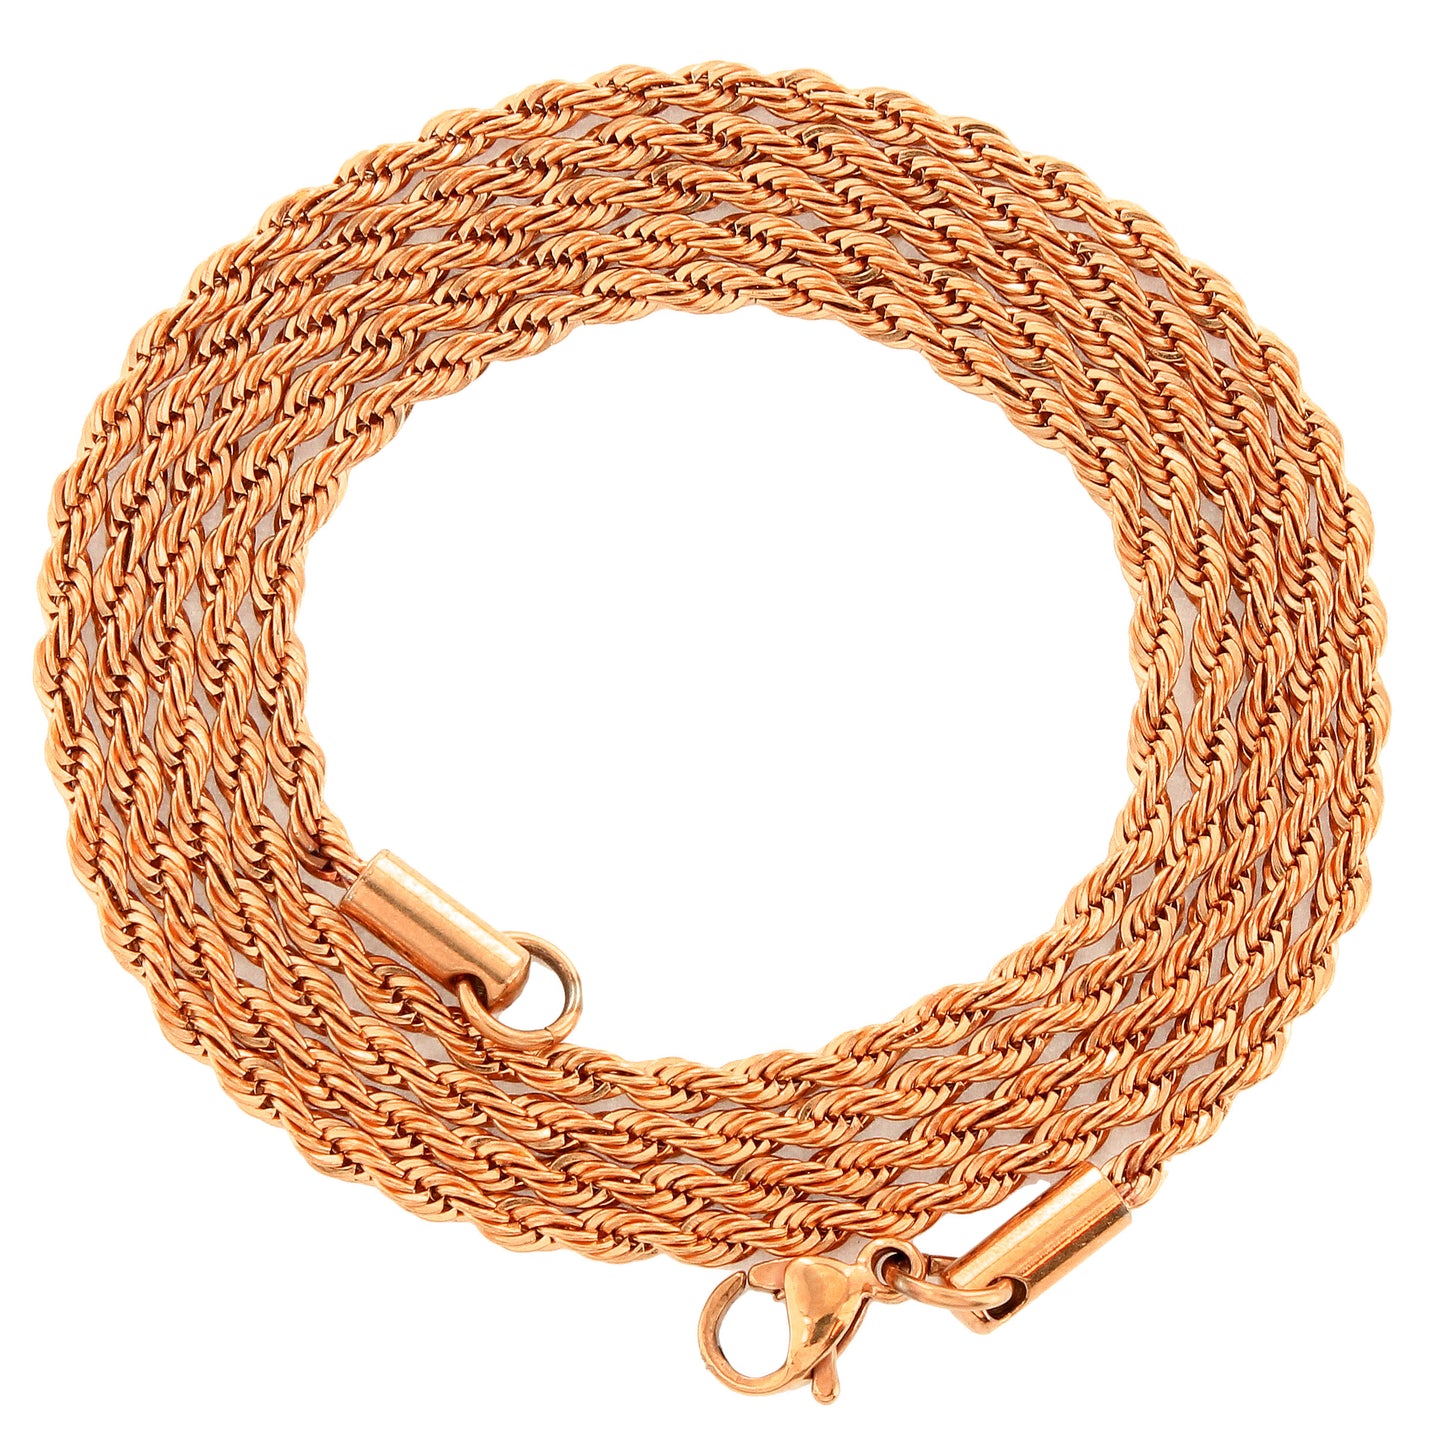 Men's Stainless Steel 24 " Fashion Rope Chain